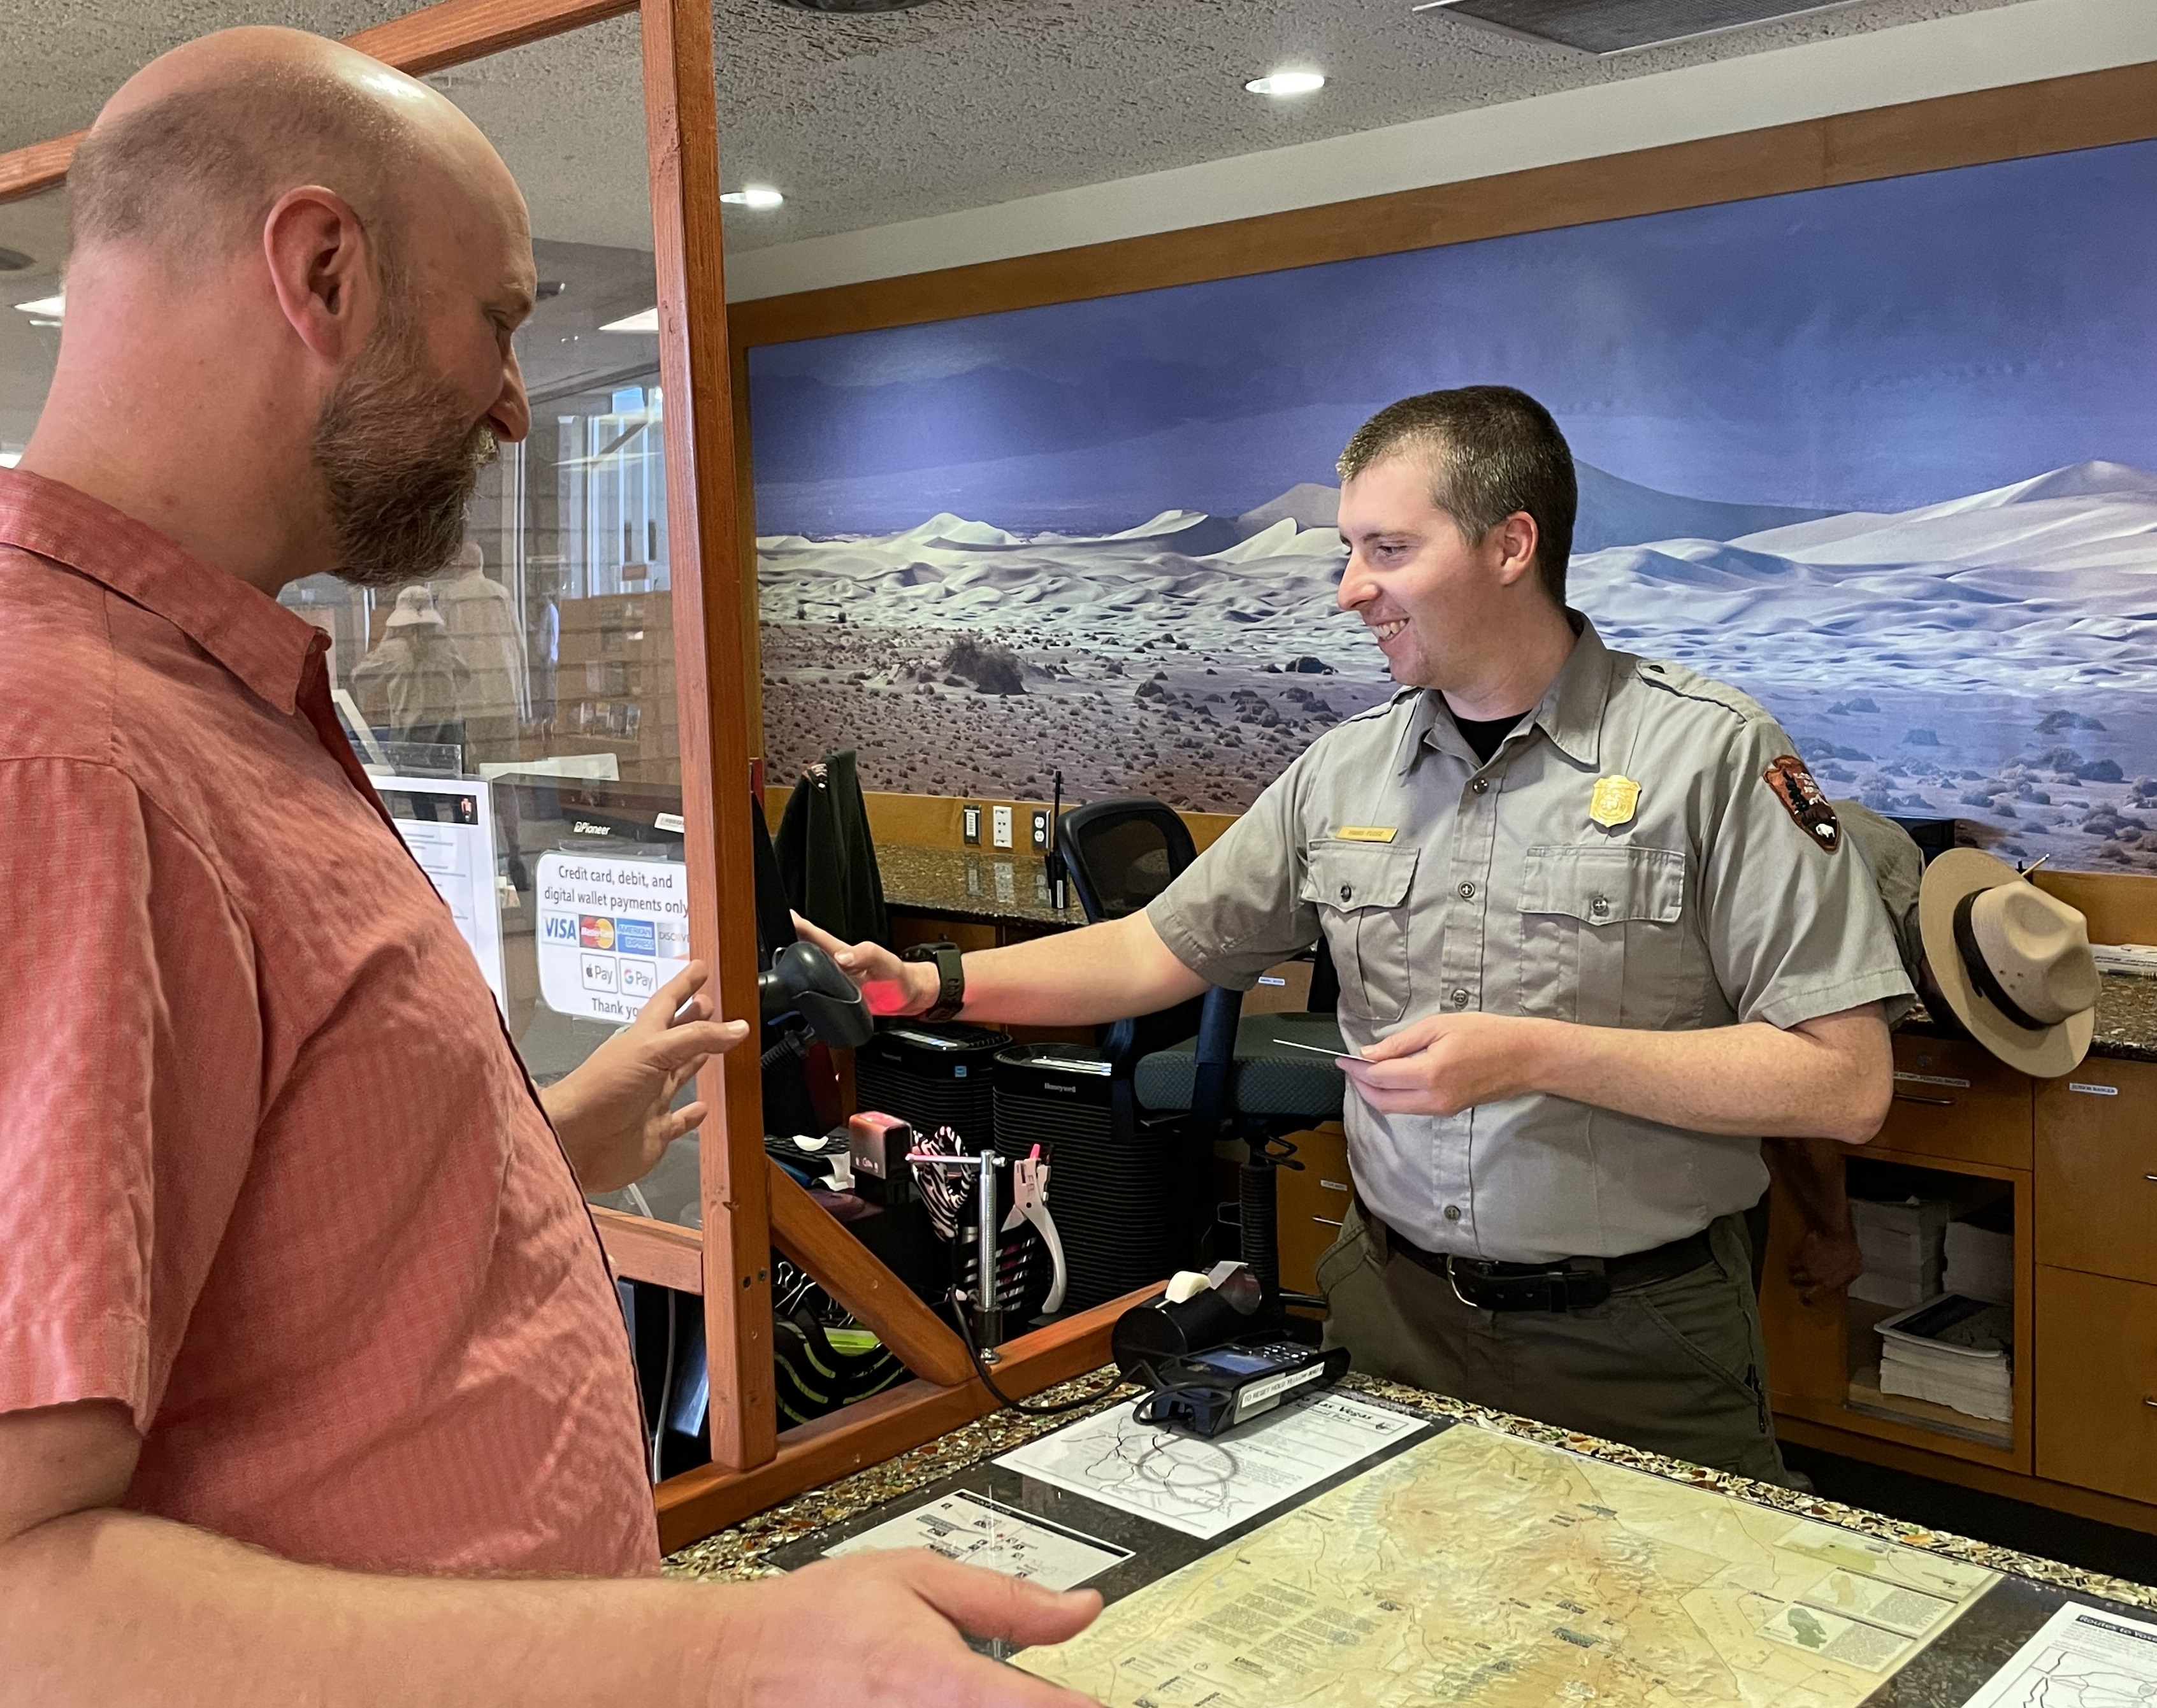 A man in a NPS uniform (gray shirt and green pants) smiles while holding a credit card. Another man in a red shirt stands on the other side of the desk.